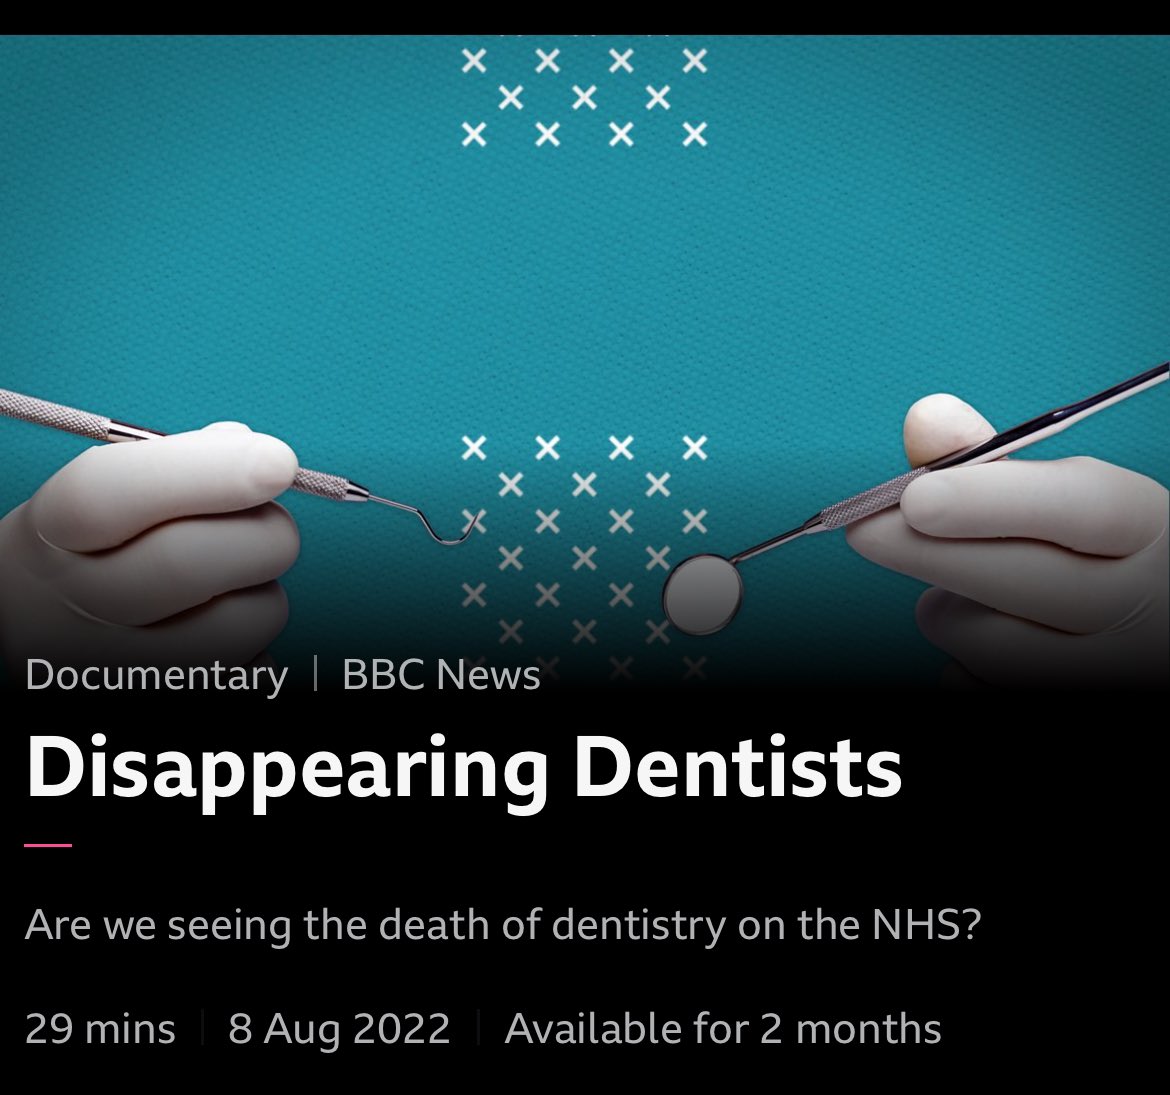 Today the PM claimed his Government offered 'far greater choice over where you can receive your care, made as simple as choosing what to watch on iPlayer.'   The options on iPlayer accurately reflect the reality facing millions seeking NHS dental care. bbc.co.uk/iplayer/episod…